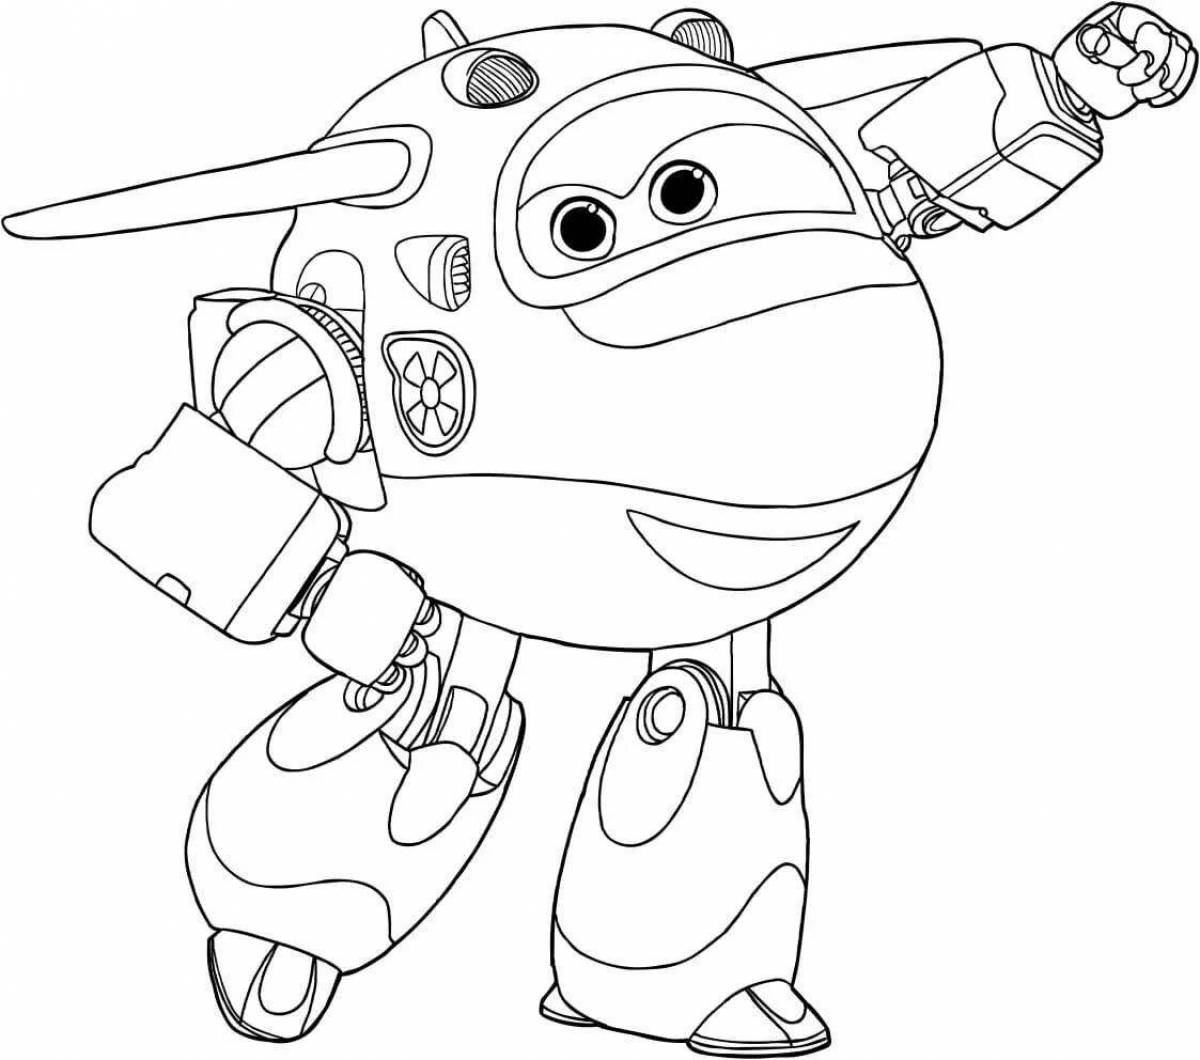 Splendid superwings jet and friends coloring page